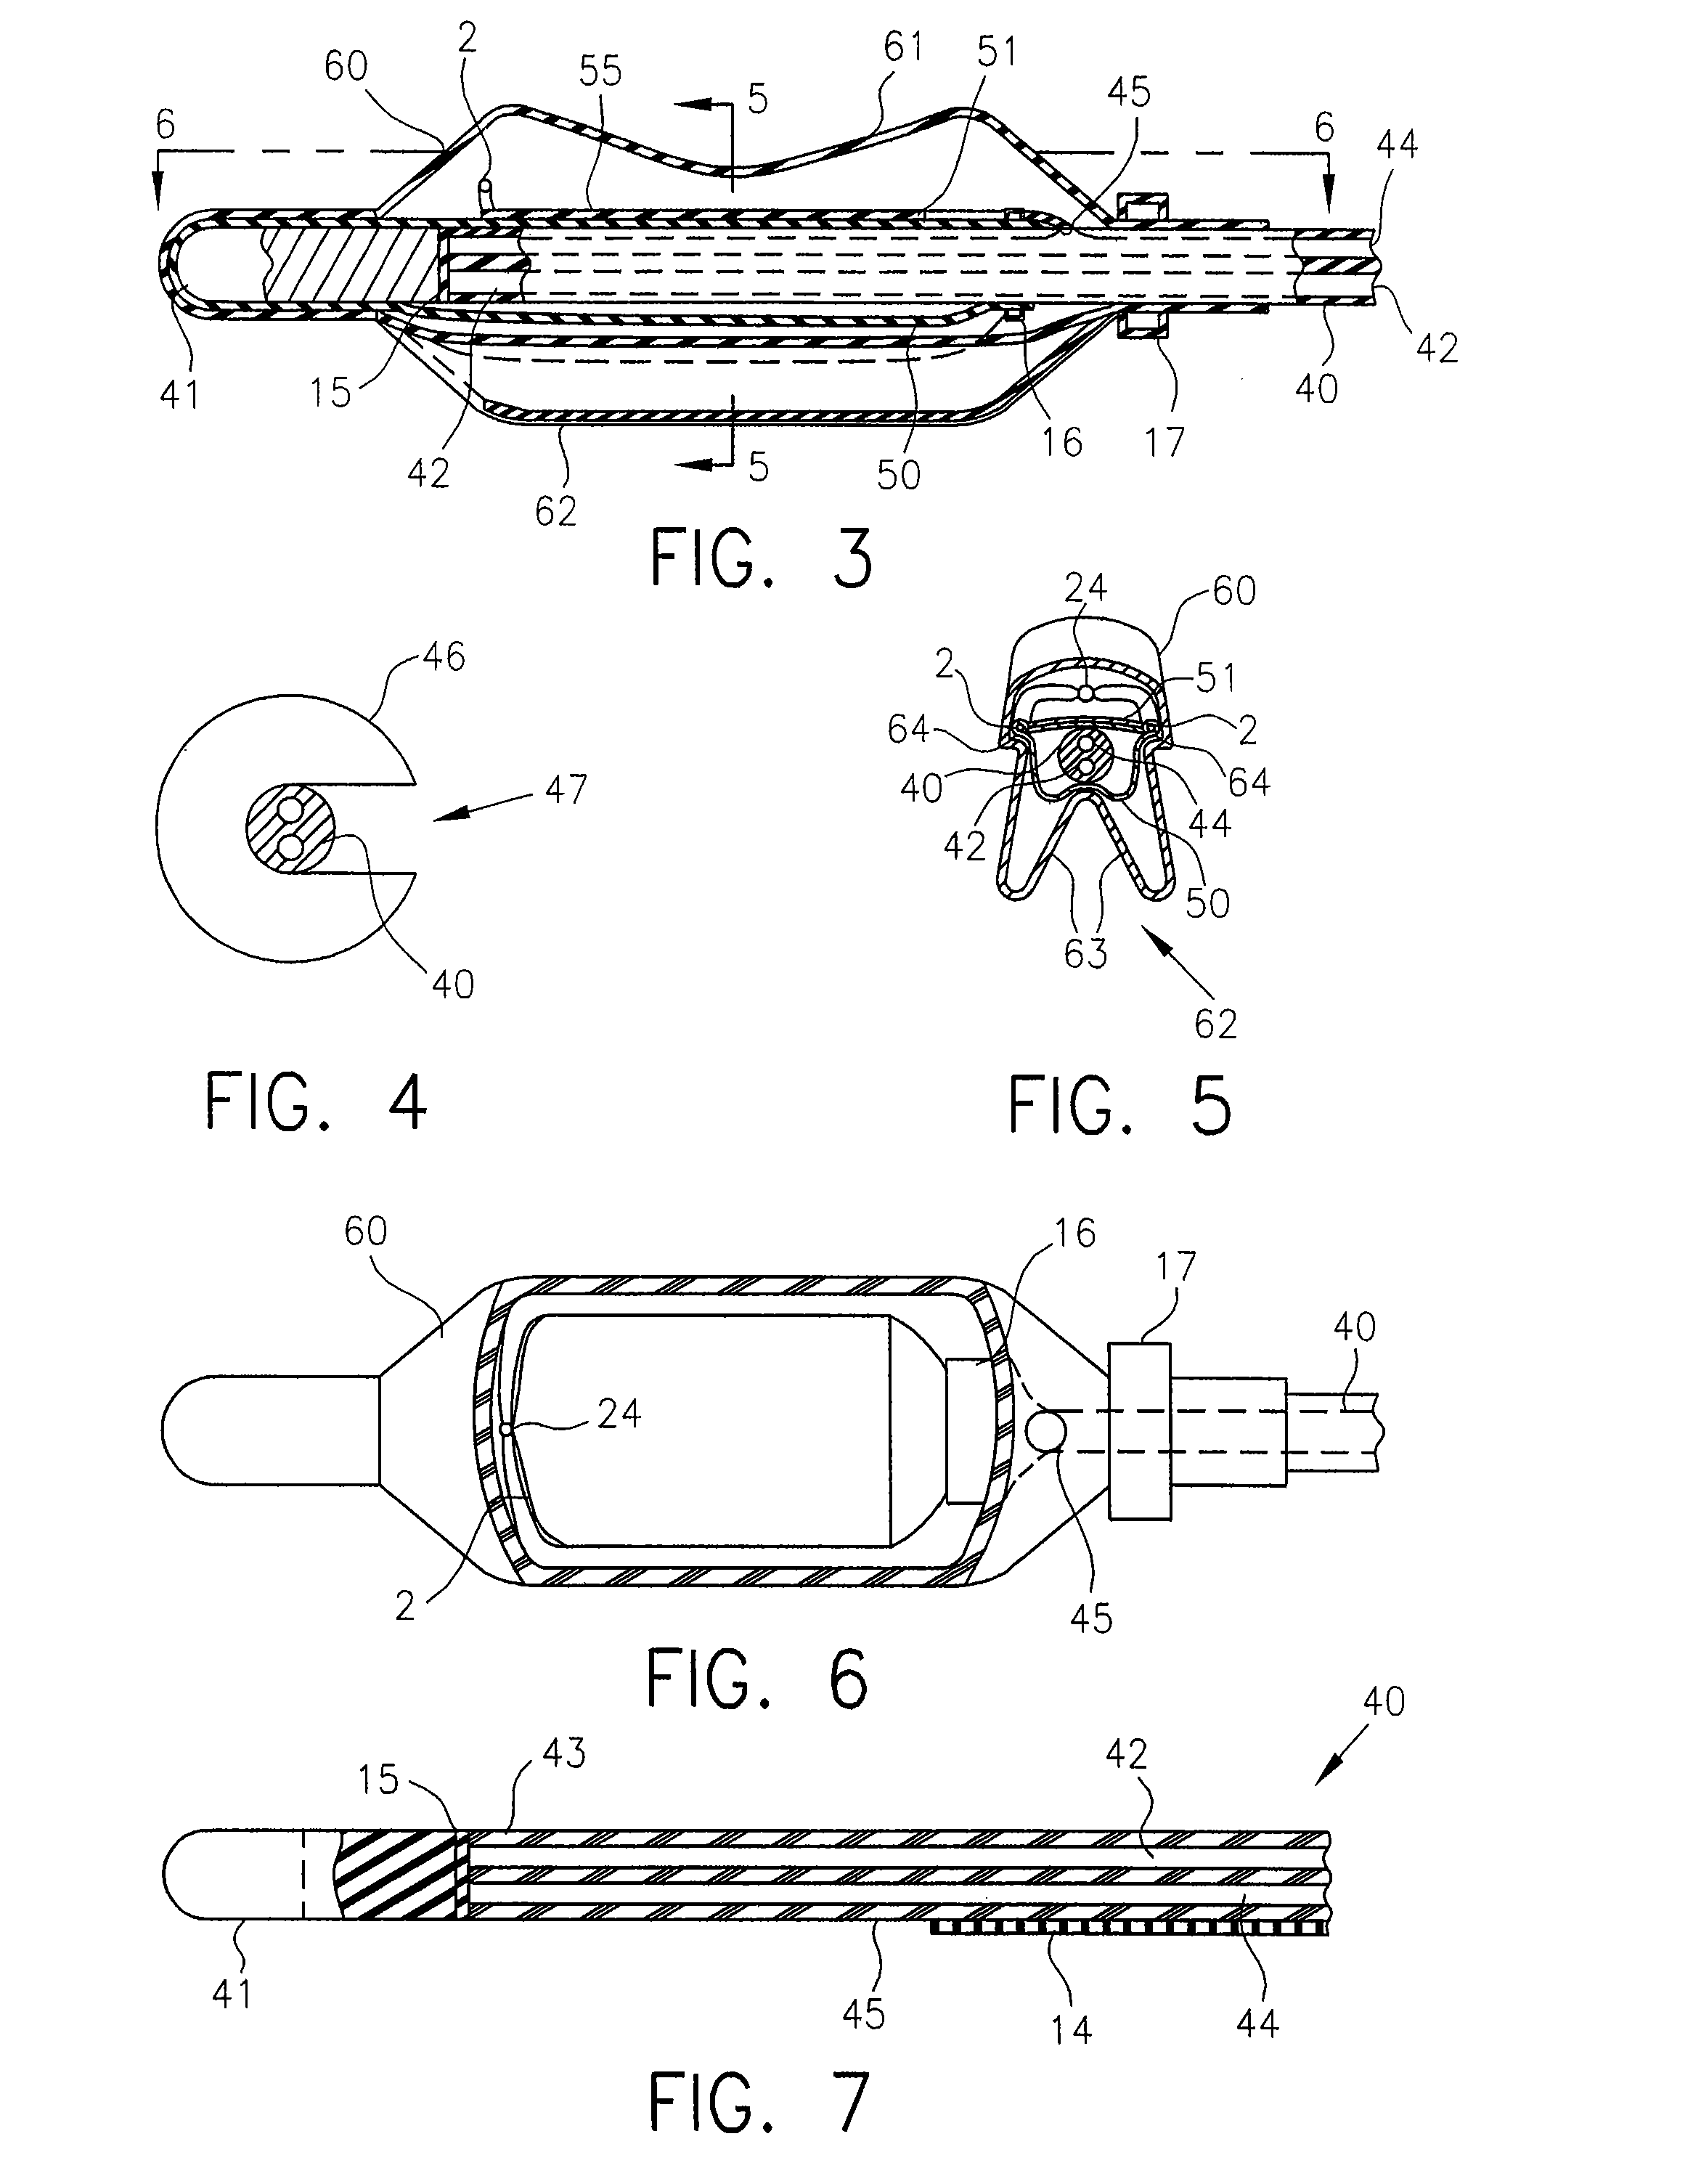 Interface devices for use with intracavity probes for high field strength magnetic resonance systems